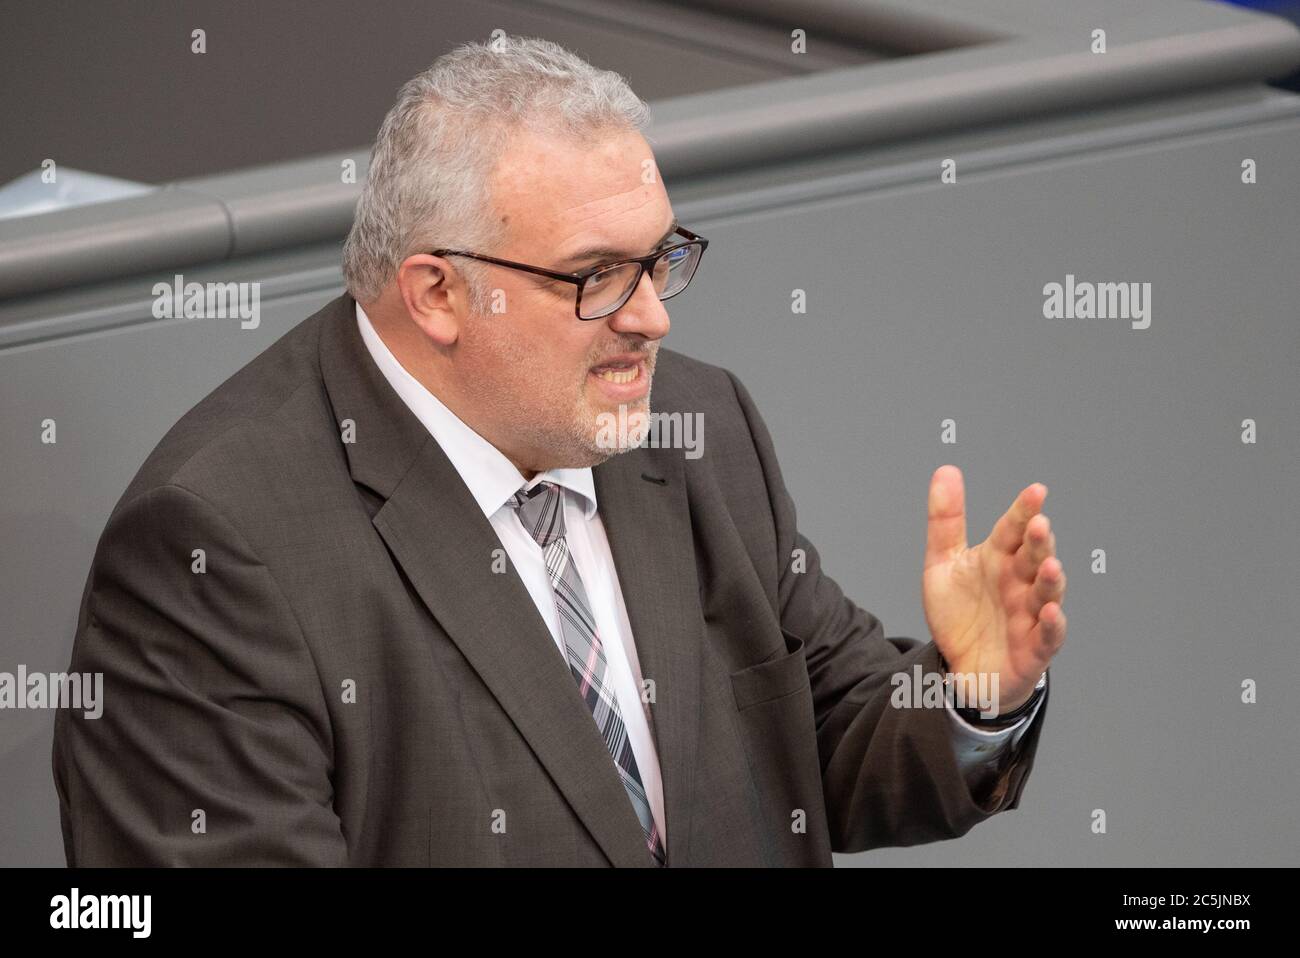 Berlin, Germany. 03rd July, 2020. Erich Irlstorfer (CSU) speaks in the plenary session of the German Bundestag. The main topics of the 171st session of the 19th legislative period are the adoption of the Coal Exit Act, a topical hour on the excesses of violence in Stuttgart, as well as debates on electoral law reform, the protection of electronic patient data, the welfare of farm animals and the German chairmanship of the UN Security Council. Credit: Christophe Gateau/dpa/Alamy Live News Stock Photo